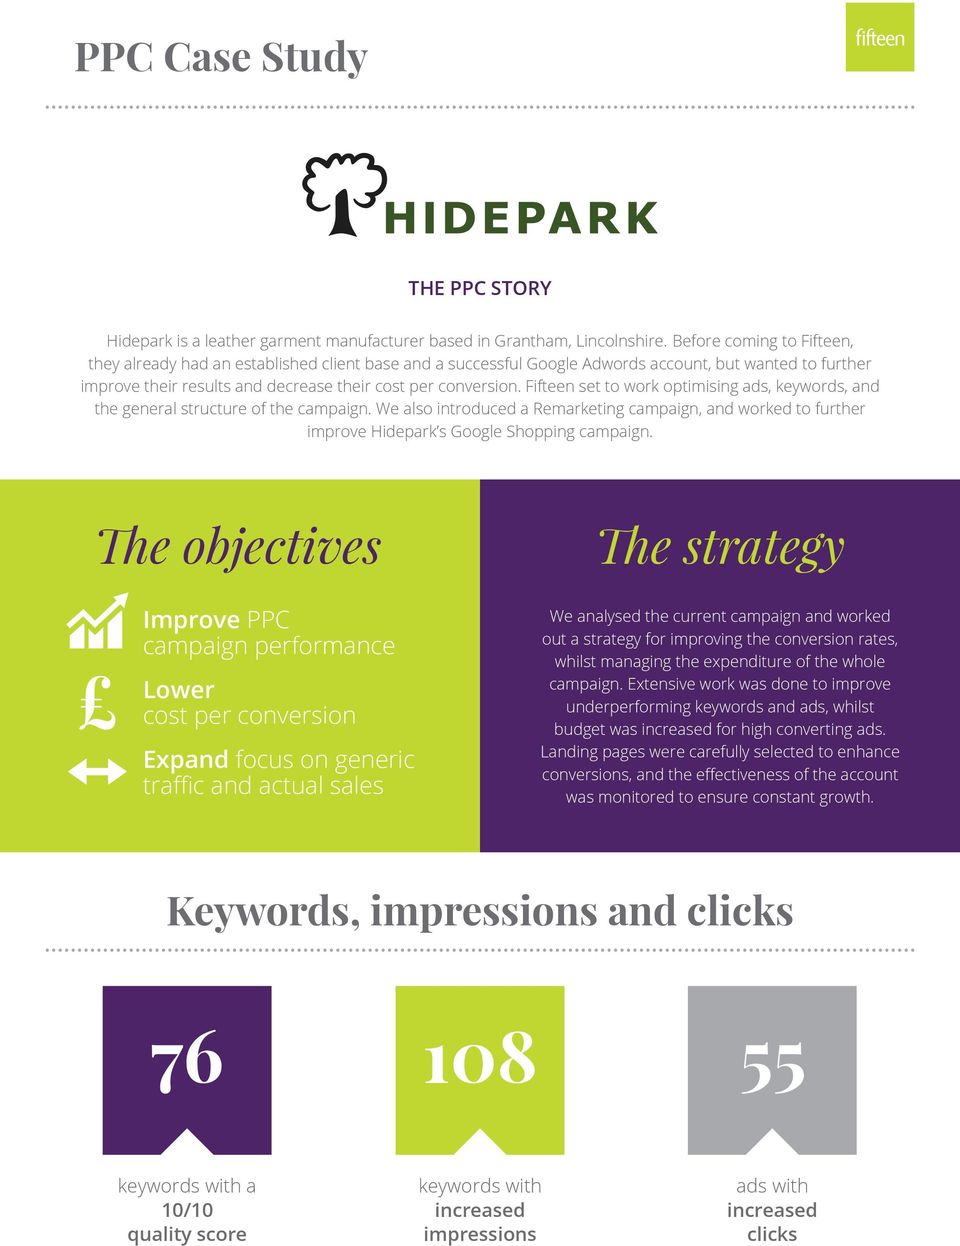 Fifteen set to work optimising ads, keywords, and the general structure of the campaign. We also introduced a Remarketing campaign, and worked to further improve Hidepark s Google Shopping campaign.